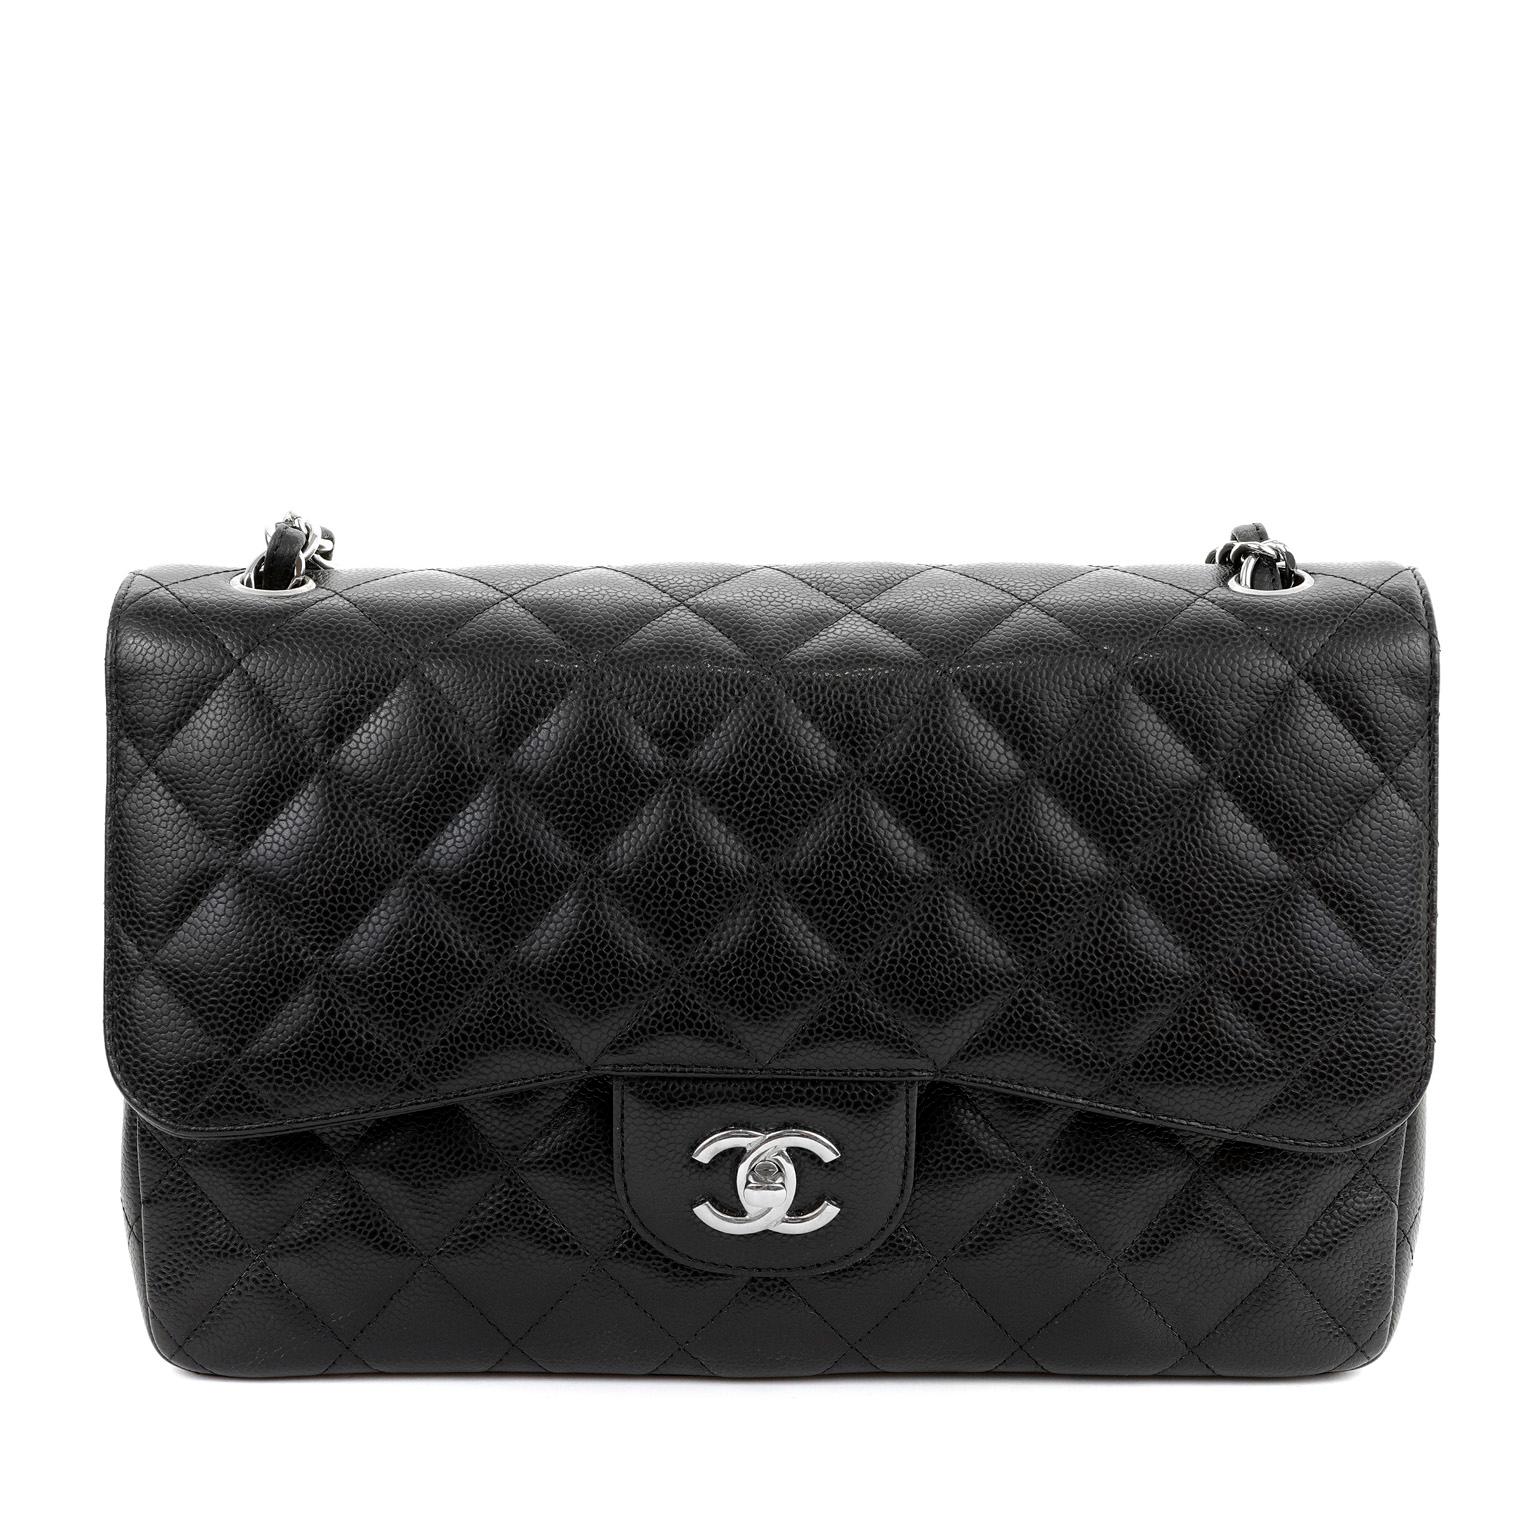 This authentic Chanel Black Caviar Jumbo Classic Flap Bag is in pristine condition.  A key piece in any sophisticated wardrobe, the Classic Flap is one of the most sought-after Chanel styles produced.

Durable and textured black caviar leather is